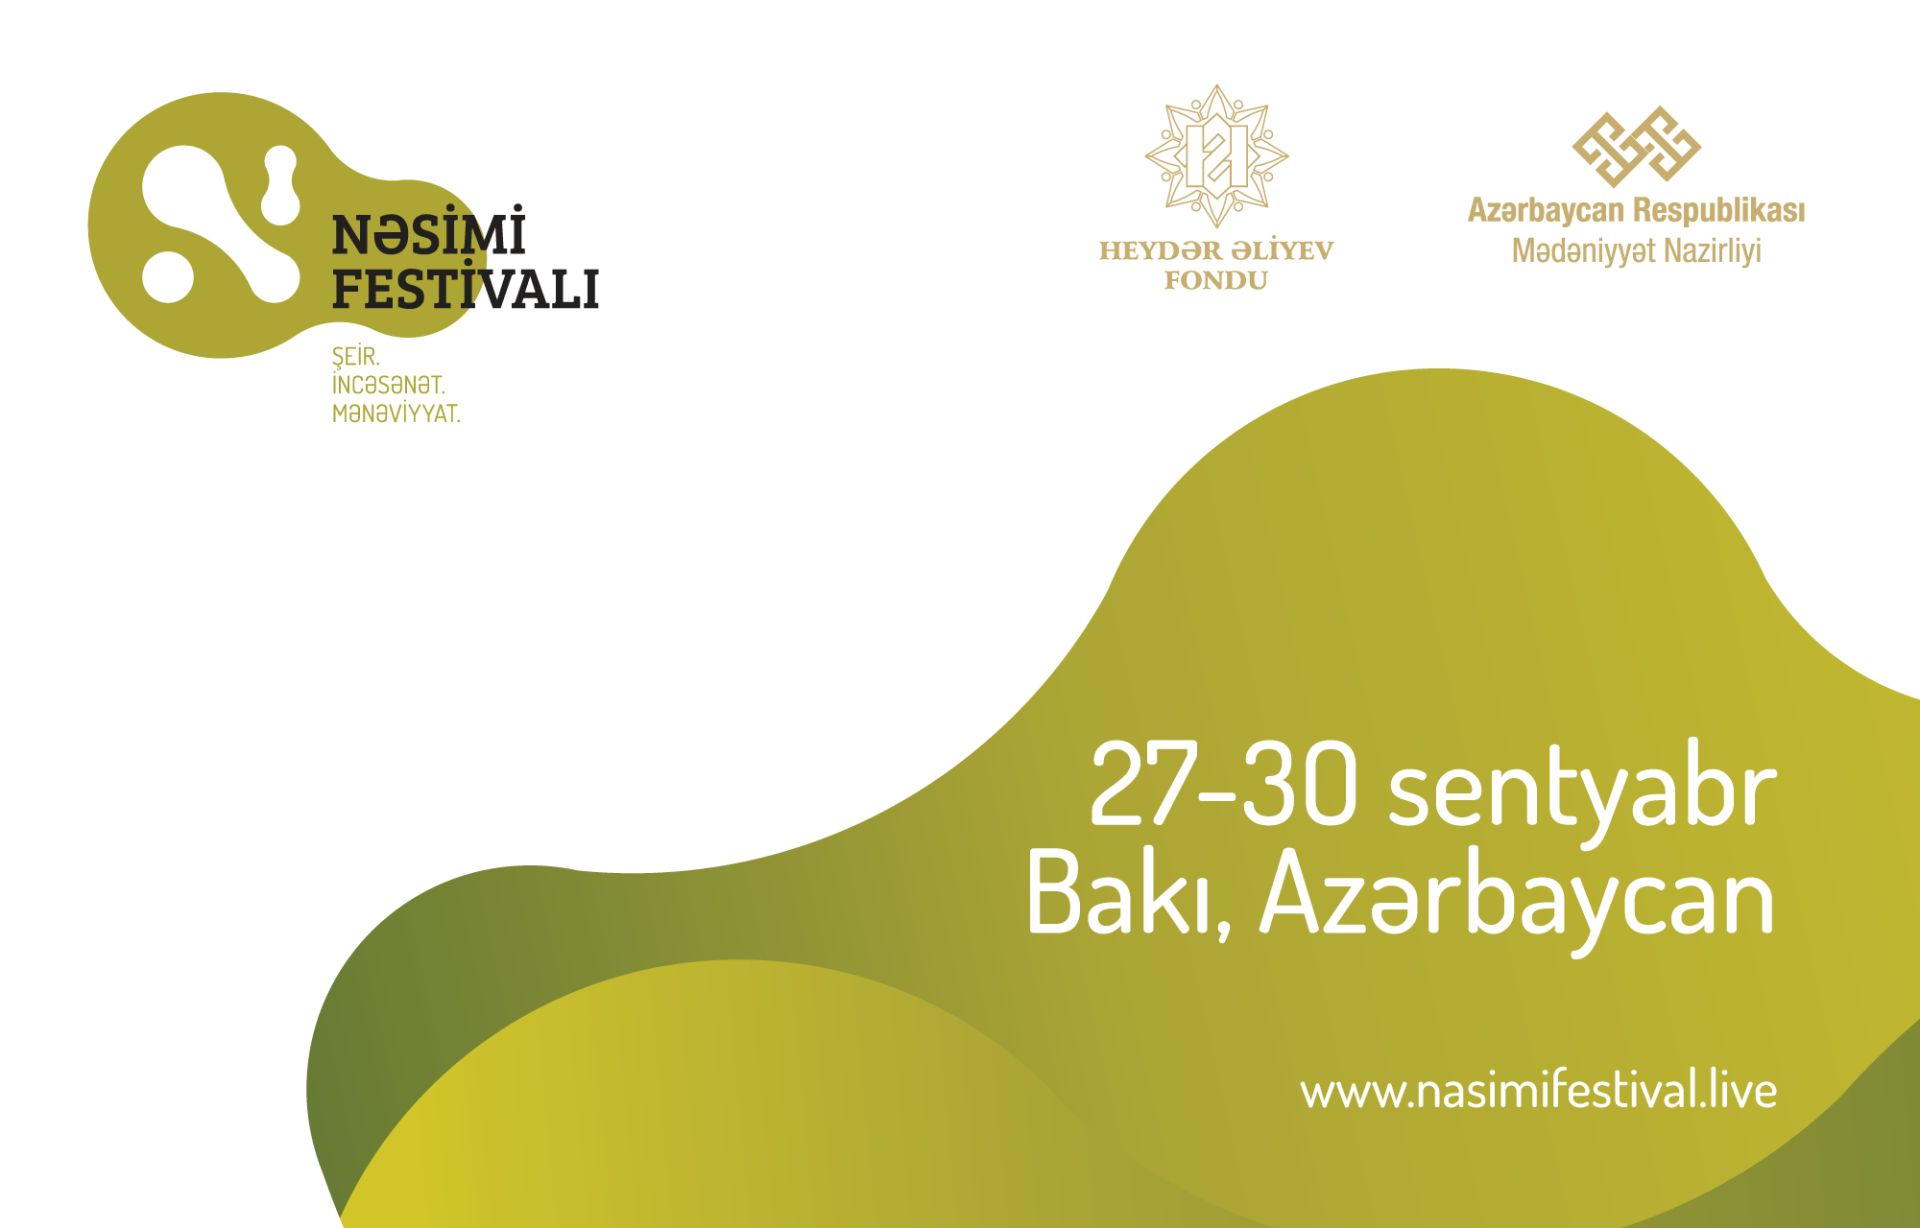 Baku to become center of search for spirituality through art, poetry at Nasimi Festival